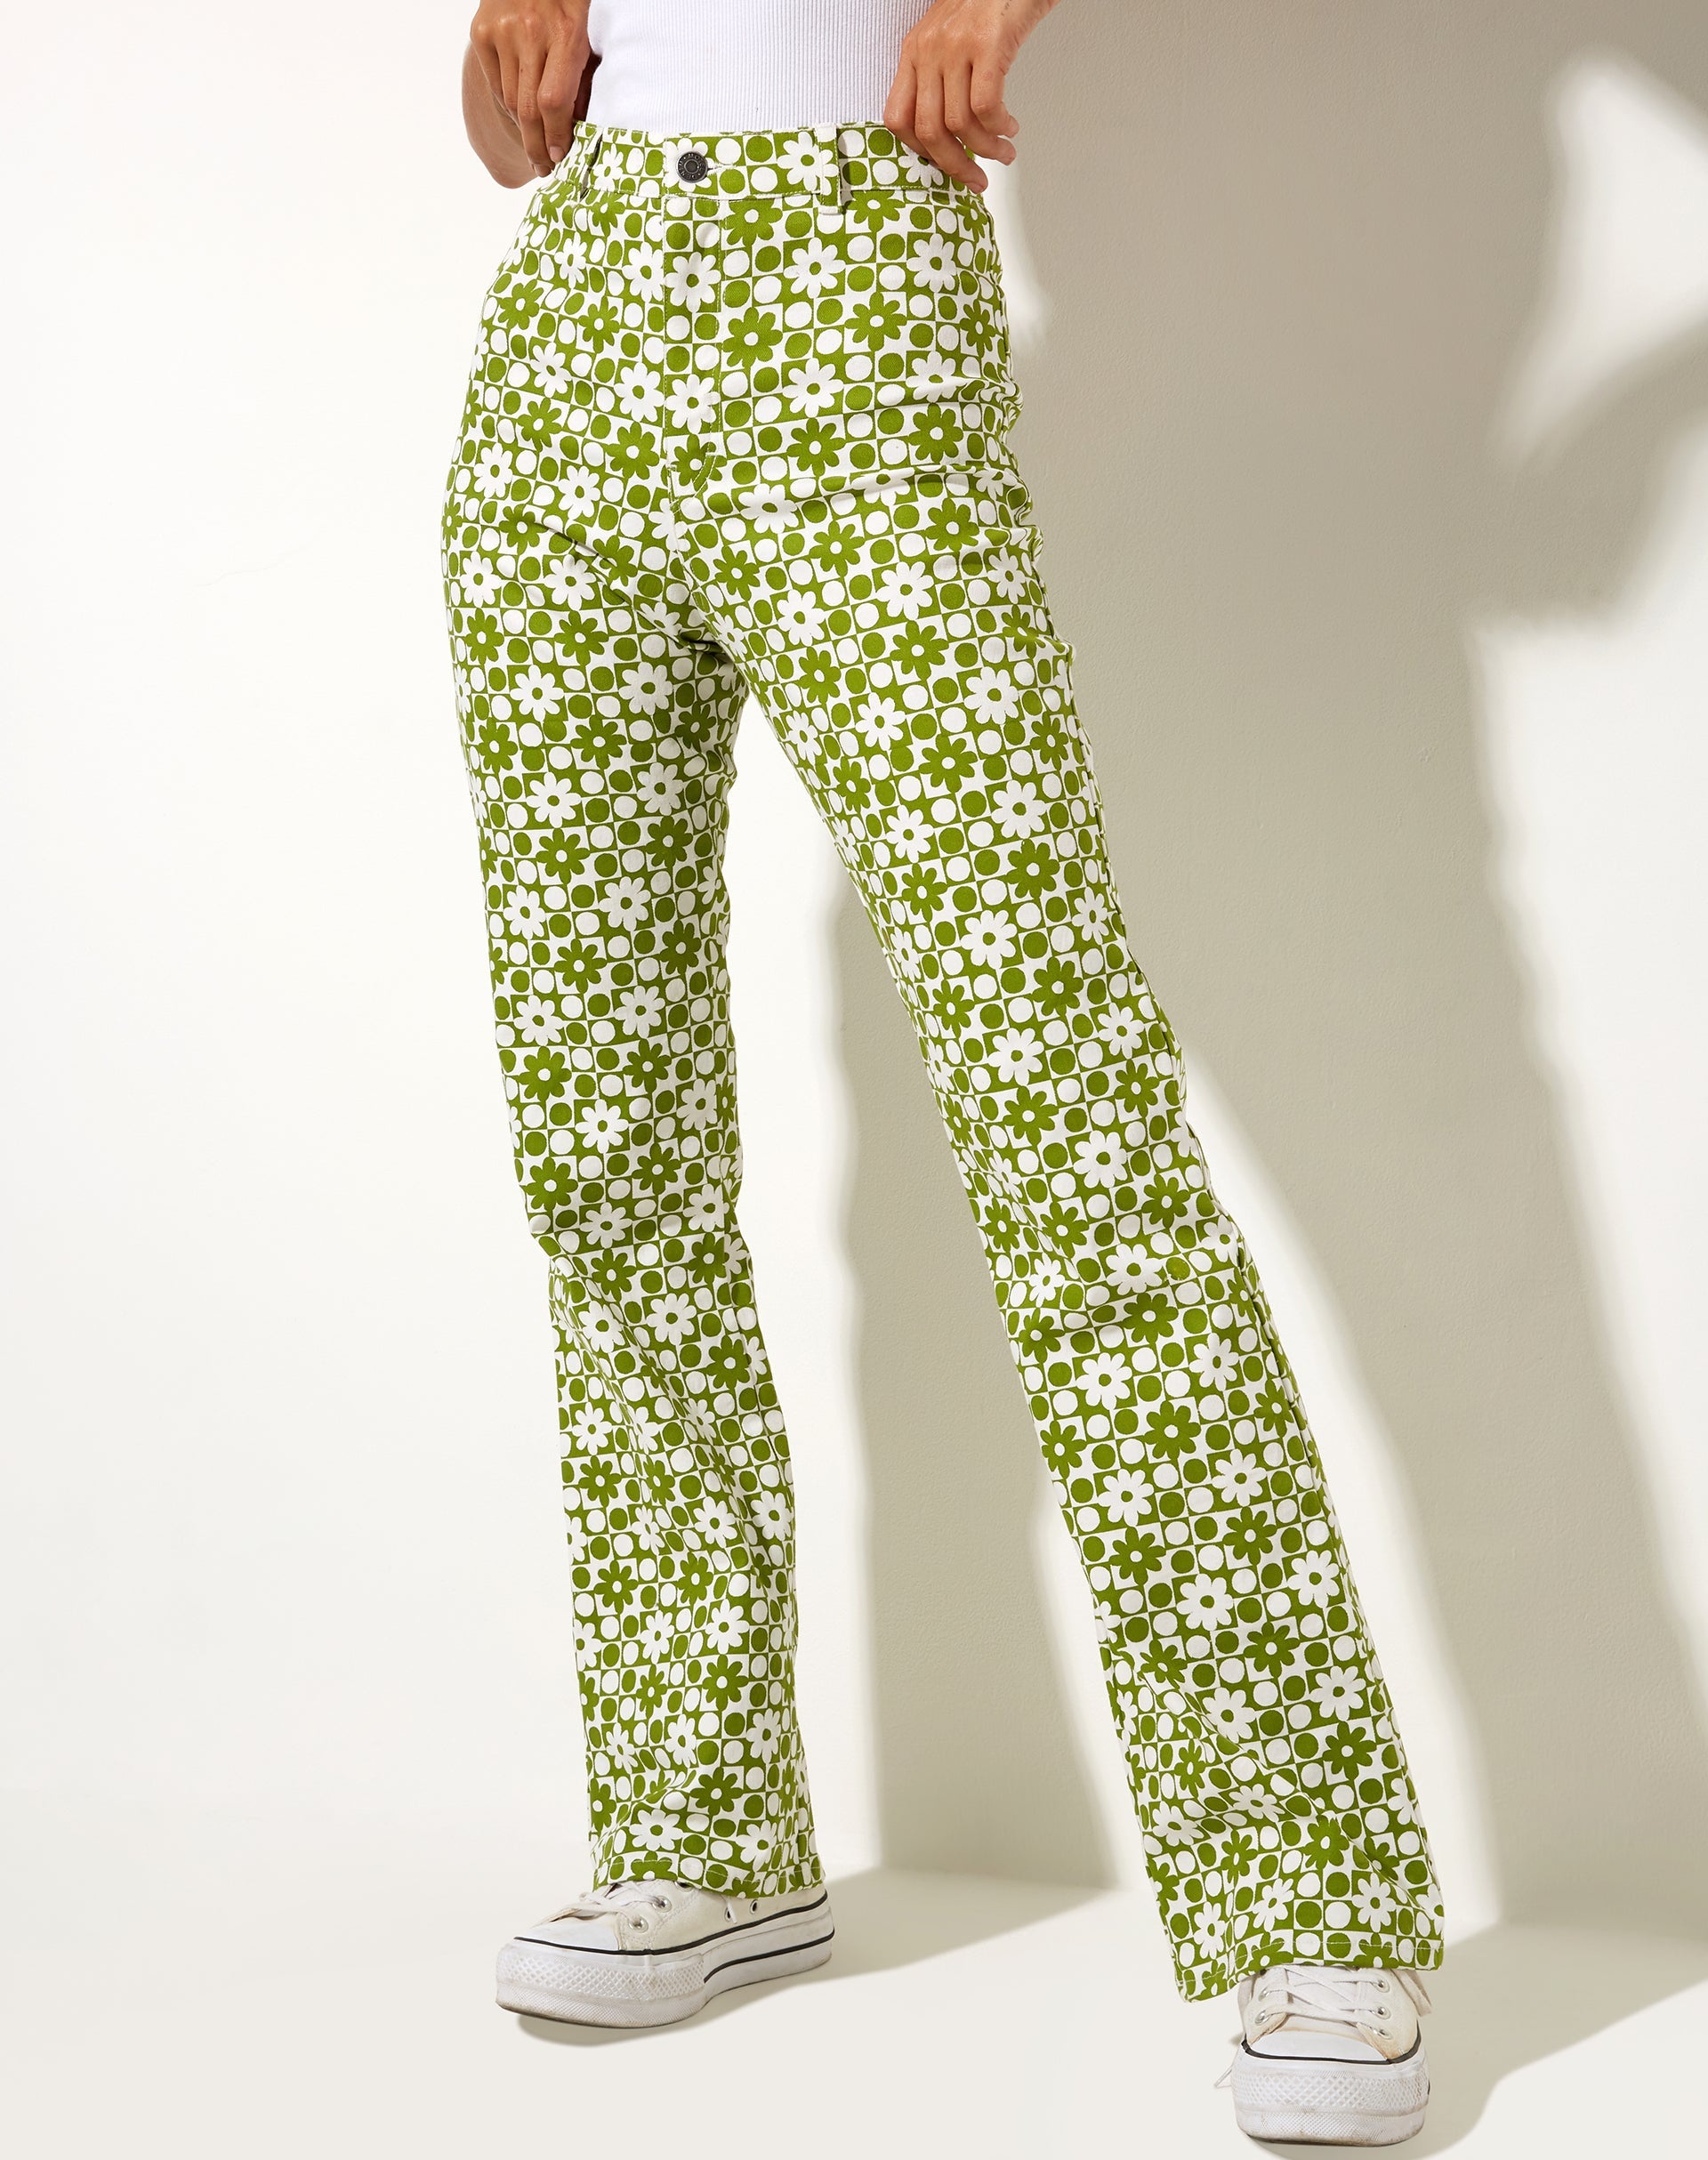 Image of Zoven Trouser in Patchwork Daisy Green